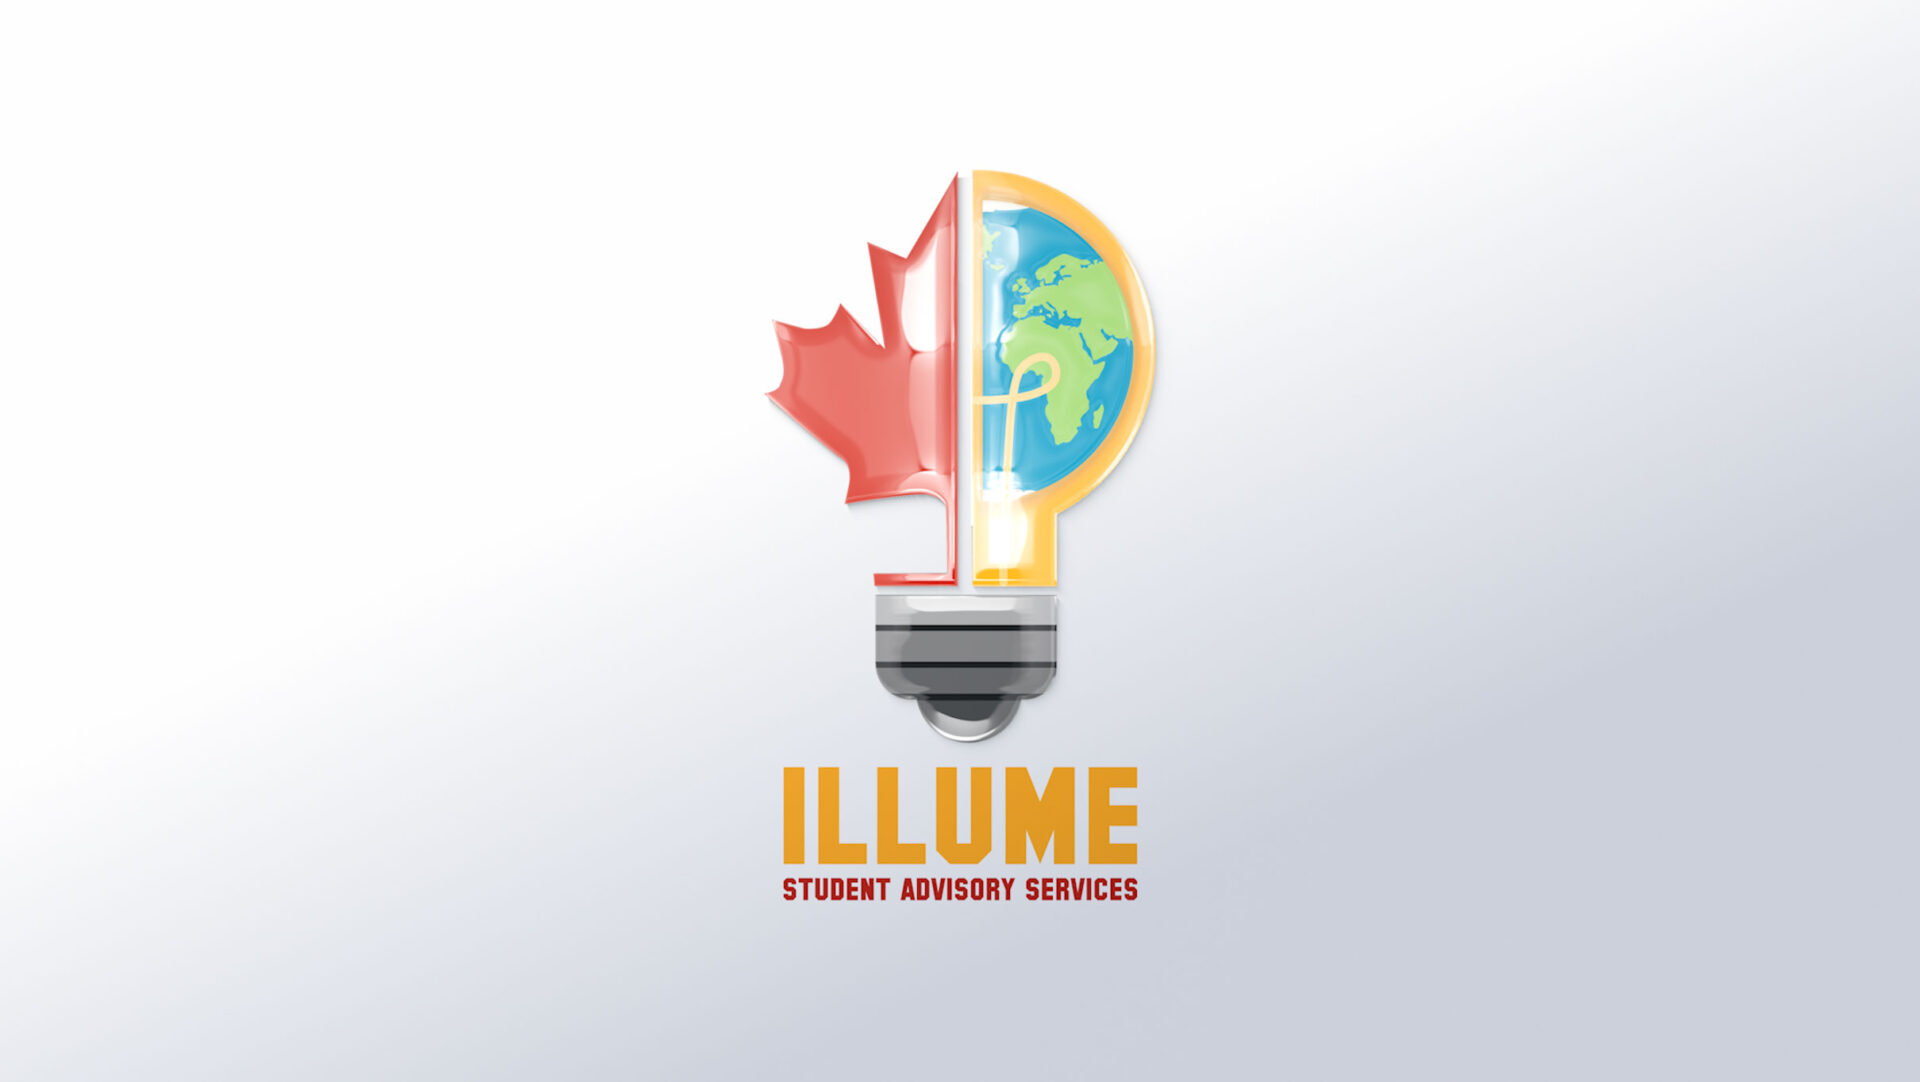 Illume Student Advisory Services has been helping students achieve their study abroad goals for over 20 years